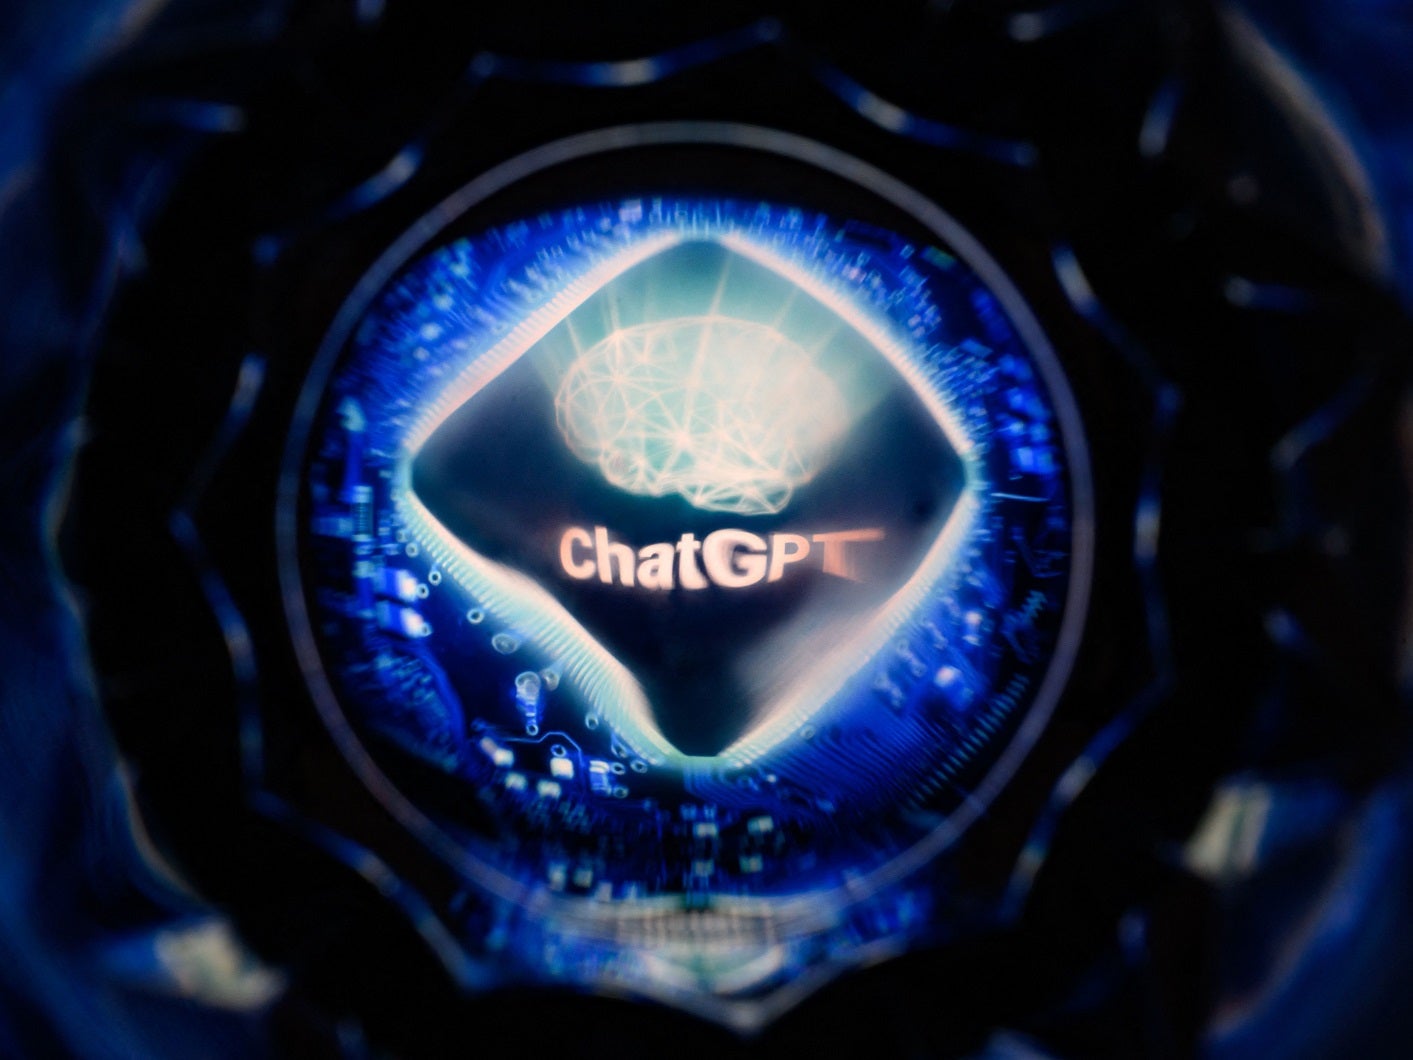 <p>A screen displaying the logo of ChatGPT, the conversational artificial intelligence software application developed by OpenAI, taken on 26 April, 2023 in Toulouse, southwestern France</p>